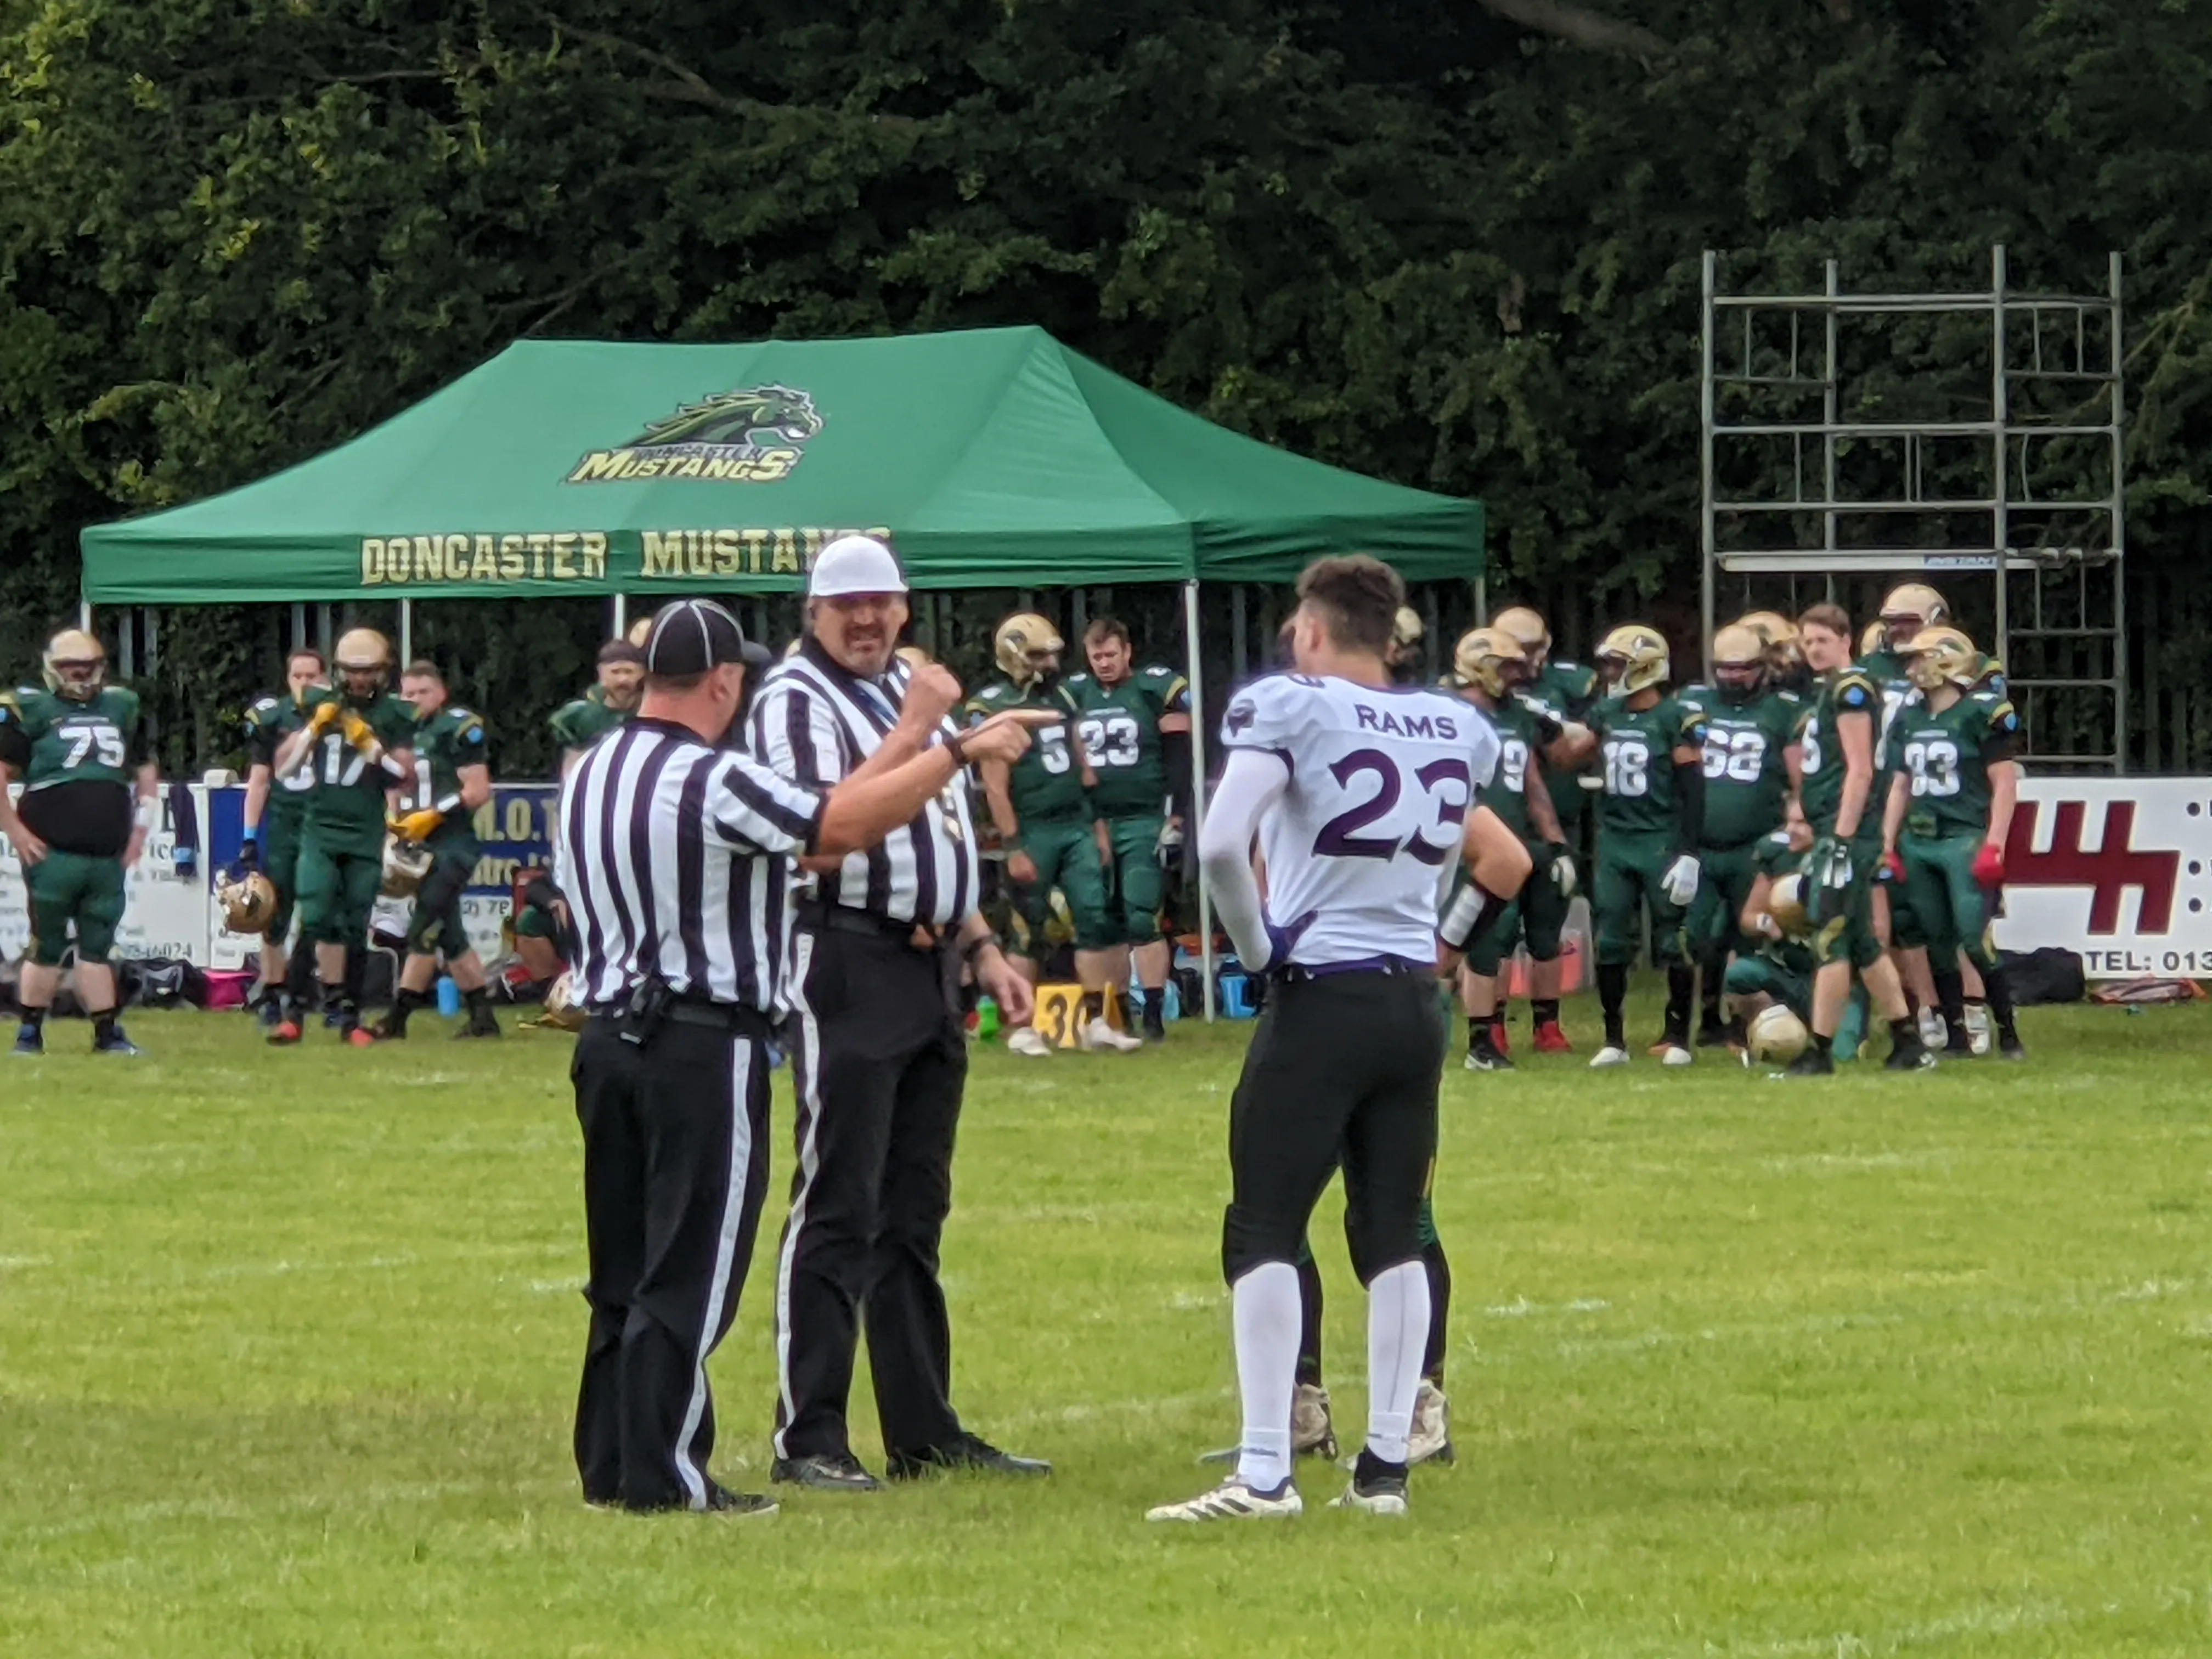 Tyler Broad meets the Mustangs&#x27; captain for the coin toss